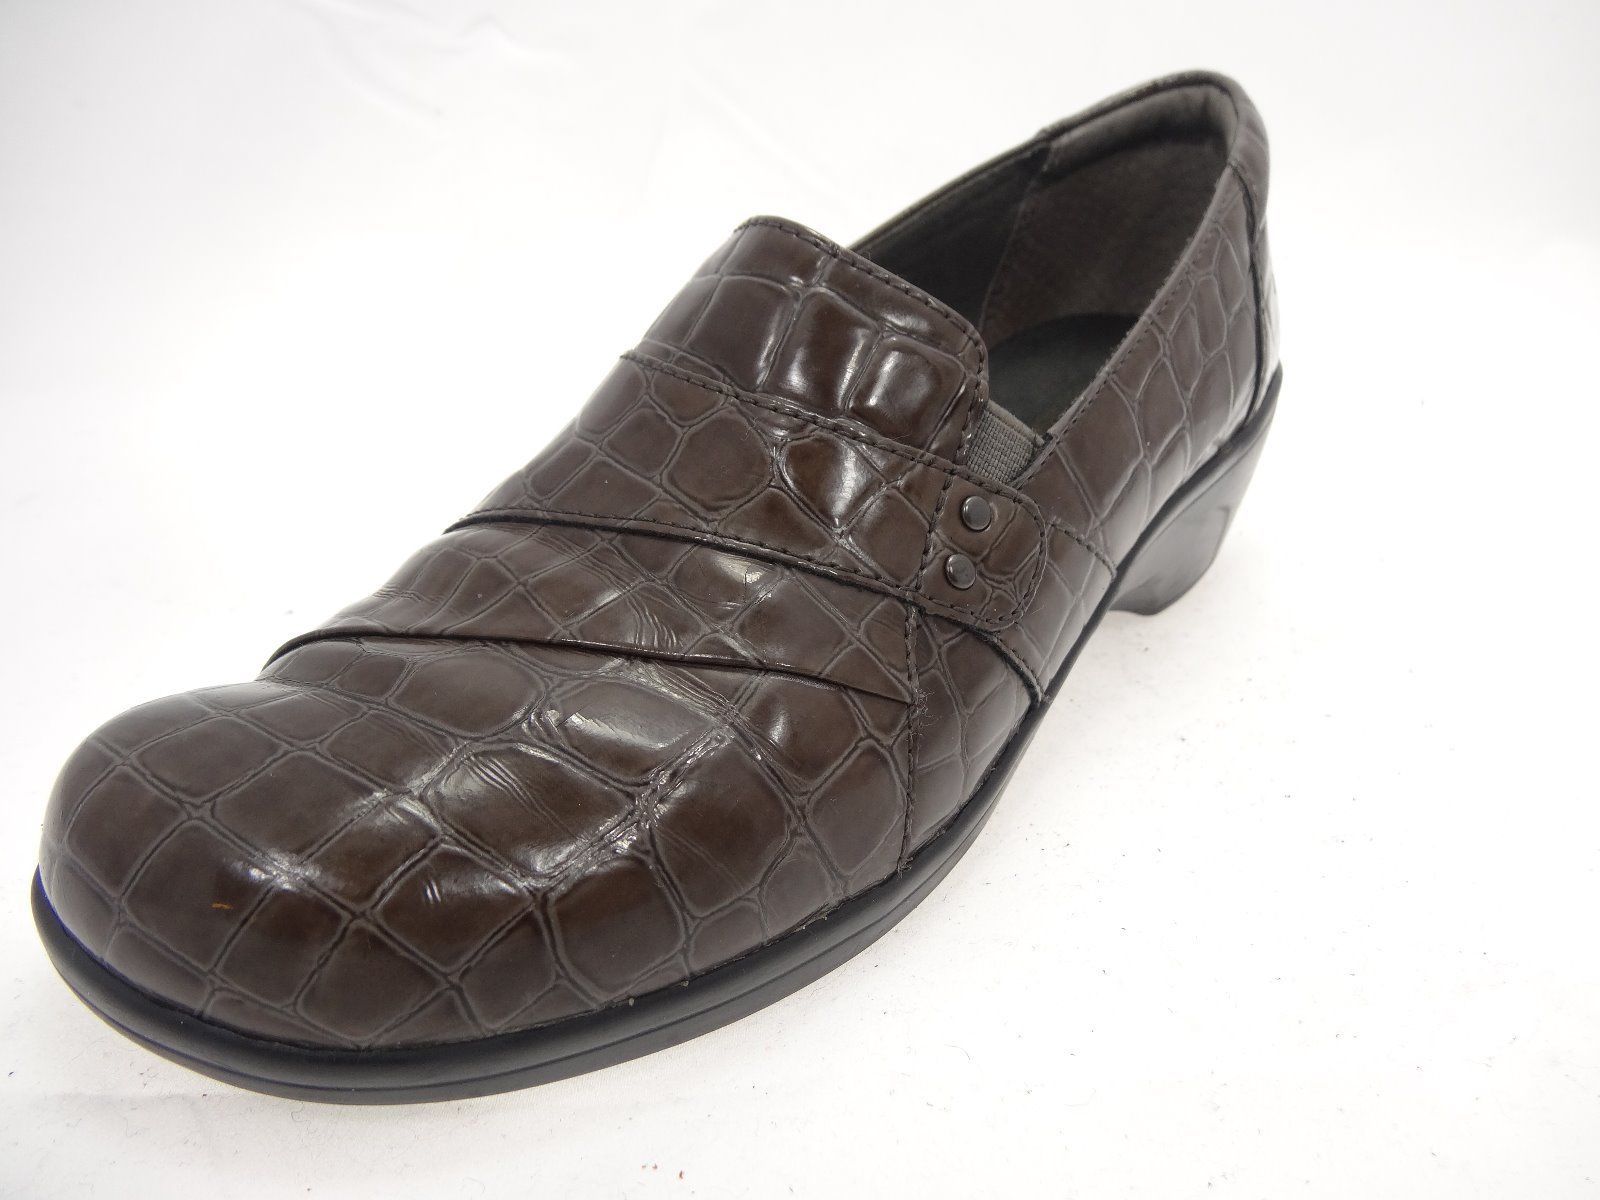 clarks croco embossed slip on loafers